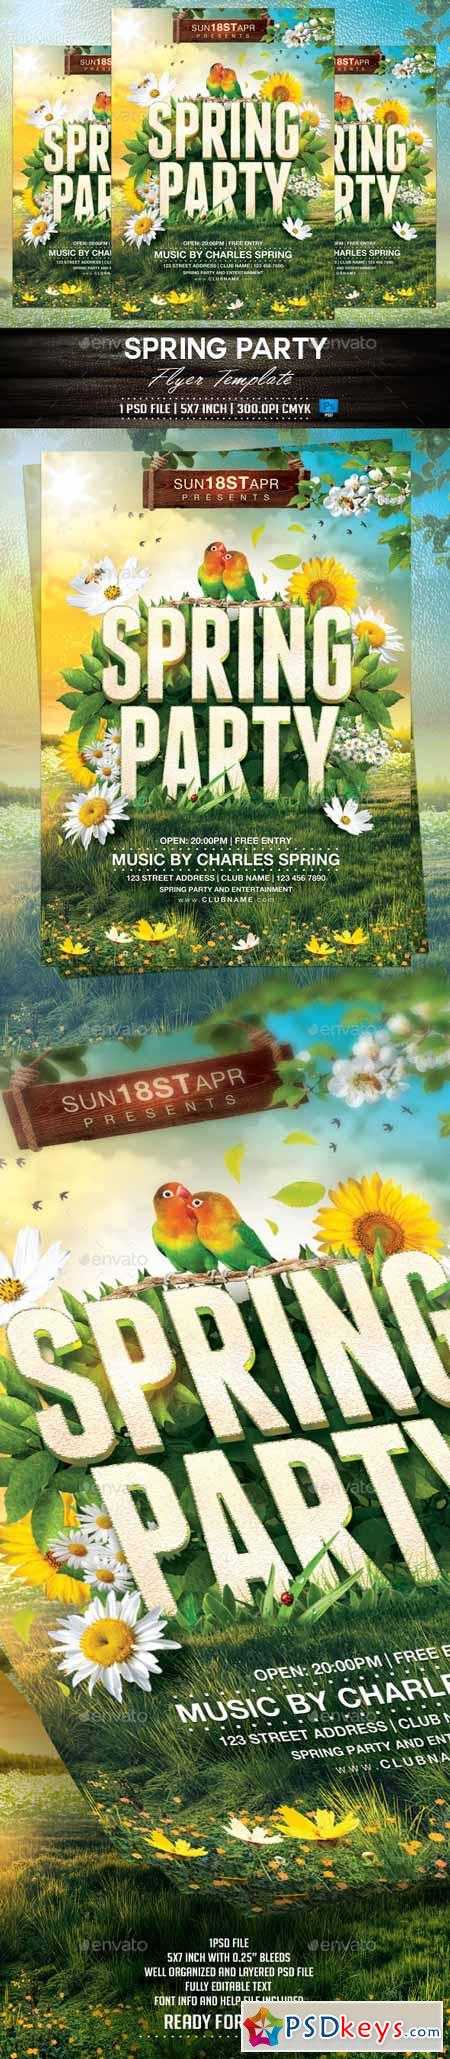 Spring Party Flyer Template 10489214 » Free Download With Regard To Free Spring Flyer Templates